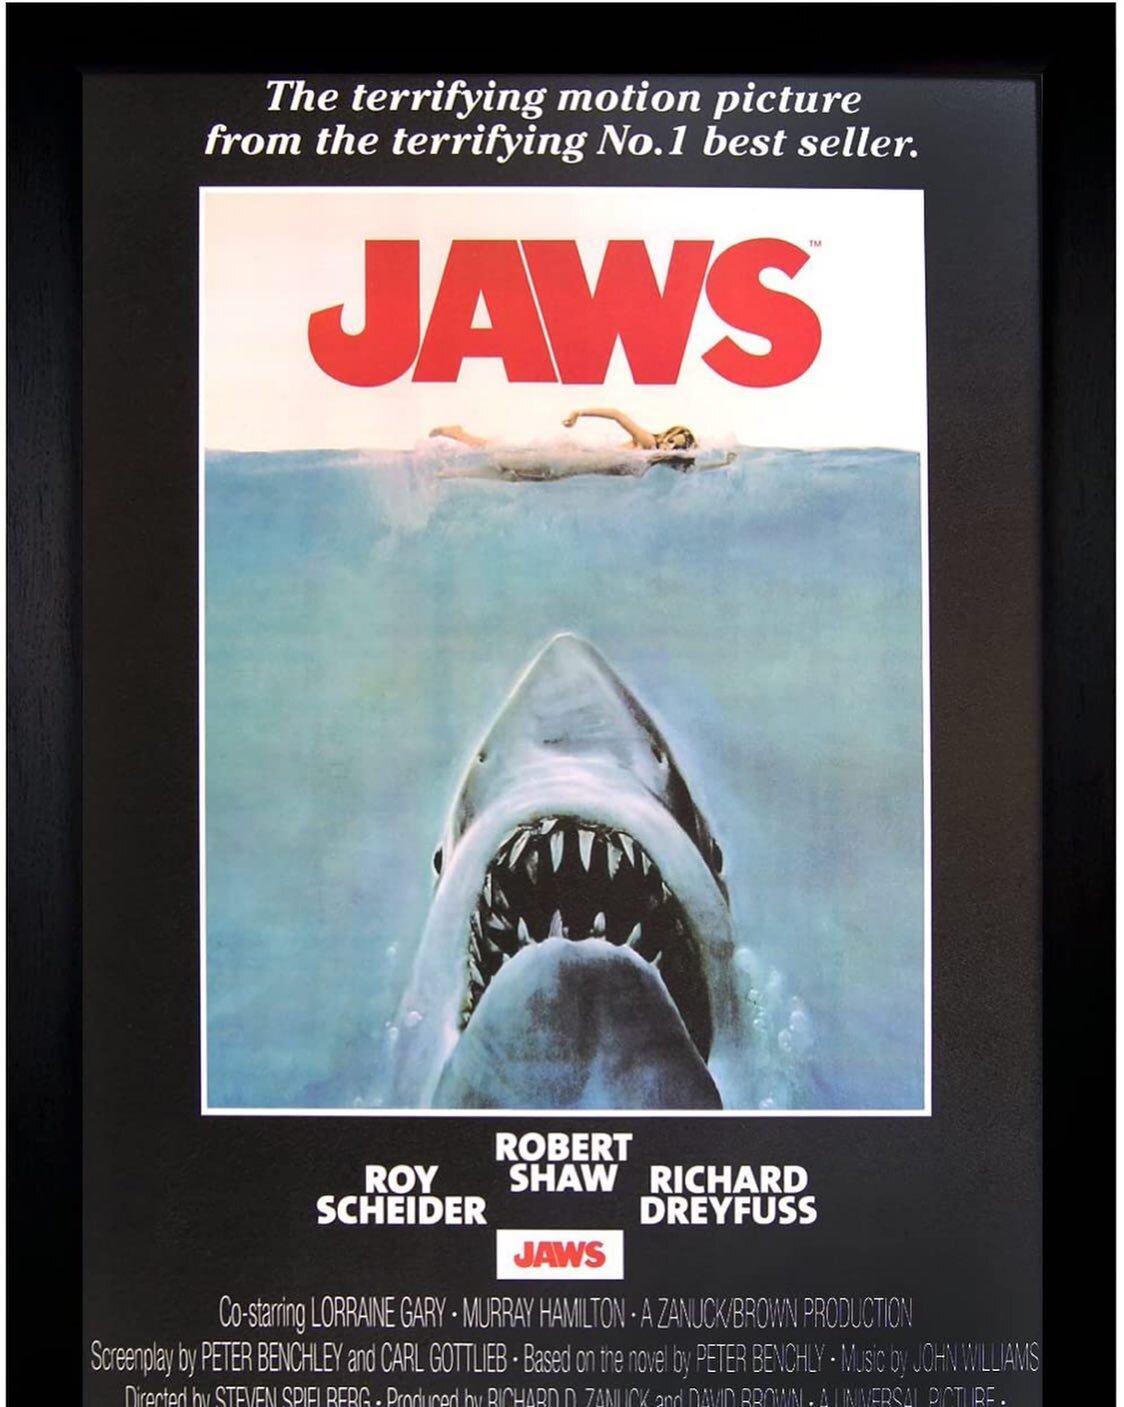 Wrap up the 4th of July weekend alongside HMF as we head out to the beach to take on the classic flick JAWS with my friend Ari! 

Apple podcasts: https://podcasts.apple.com/us/podcast/horror-fying-my-friends/id1495709006?i=1000527855182

Spotify: htt